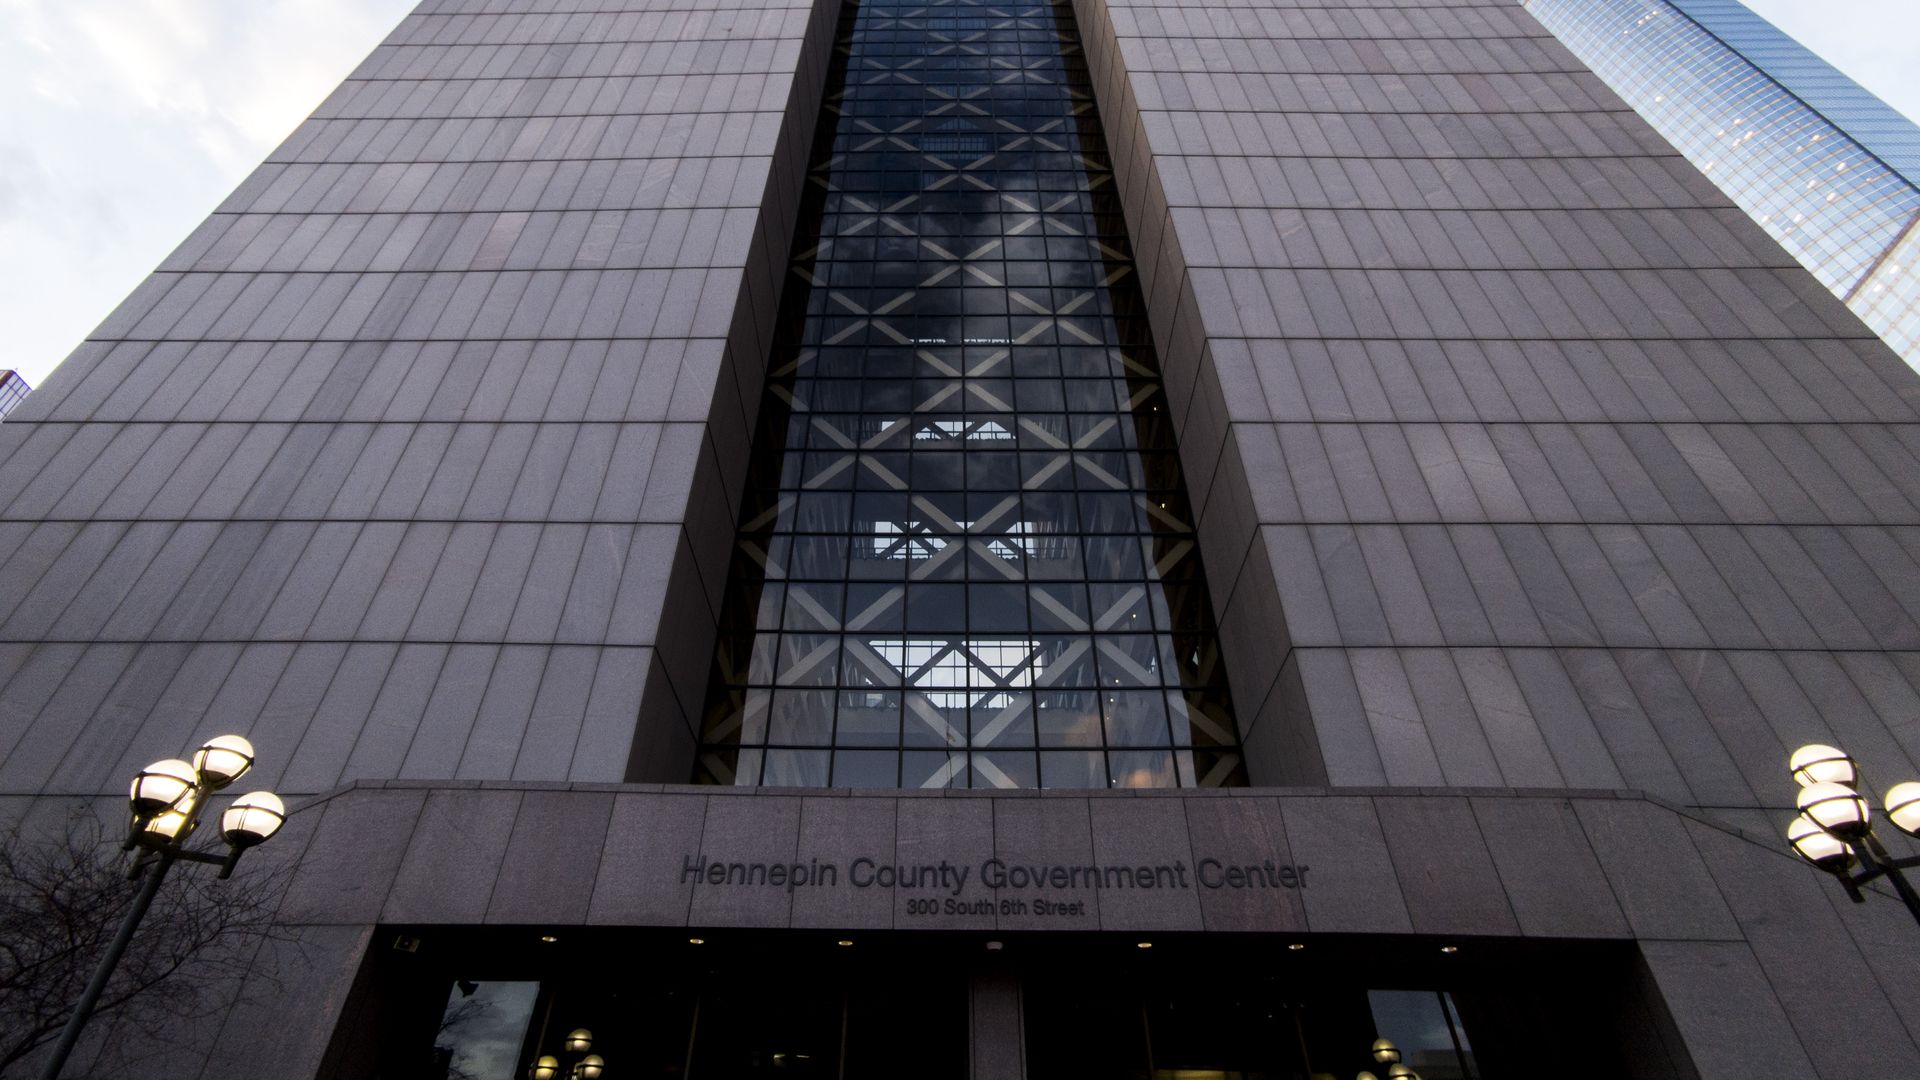 The exterior of the Hennepin County Government Center